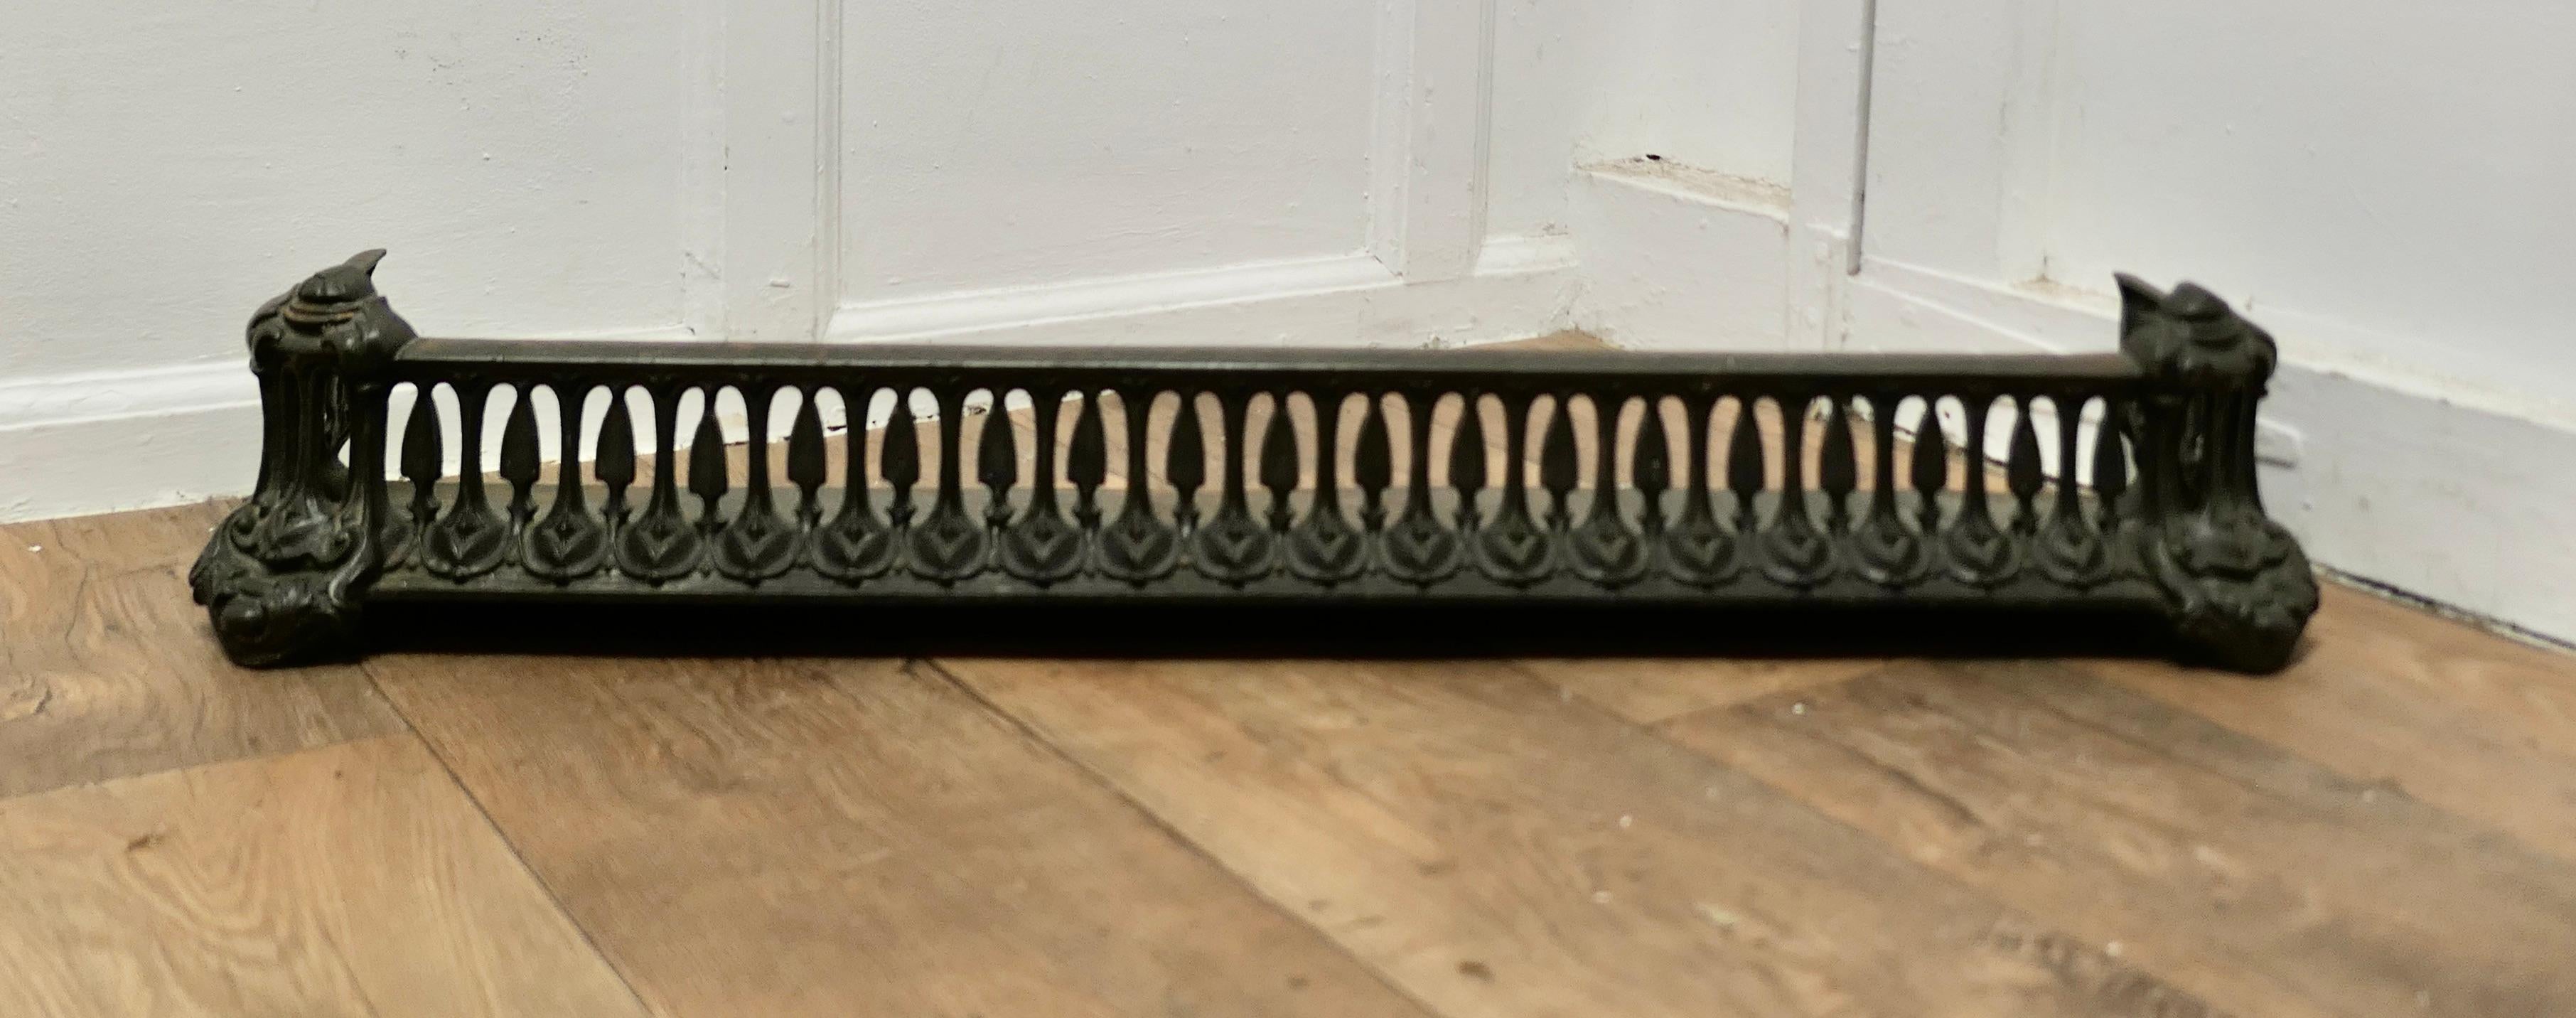 Art Nouveau Cast Iron Colebrookdale Style Fender or Dog Grate

This is a Good Victorian Fender it is good and heavy, fenders like this were known as Dog Grates as they serve to rest the fire tools and keep any rolling ash in check
The Fender is in